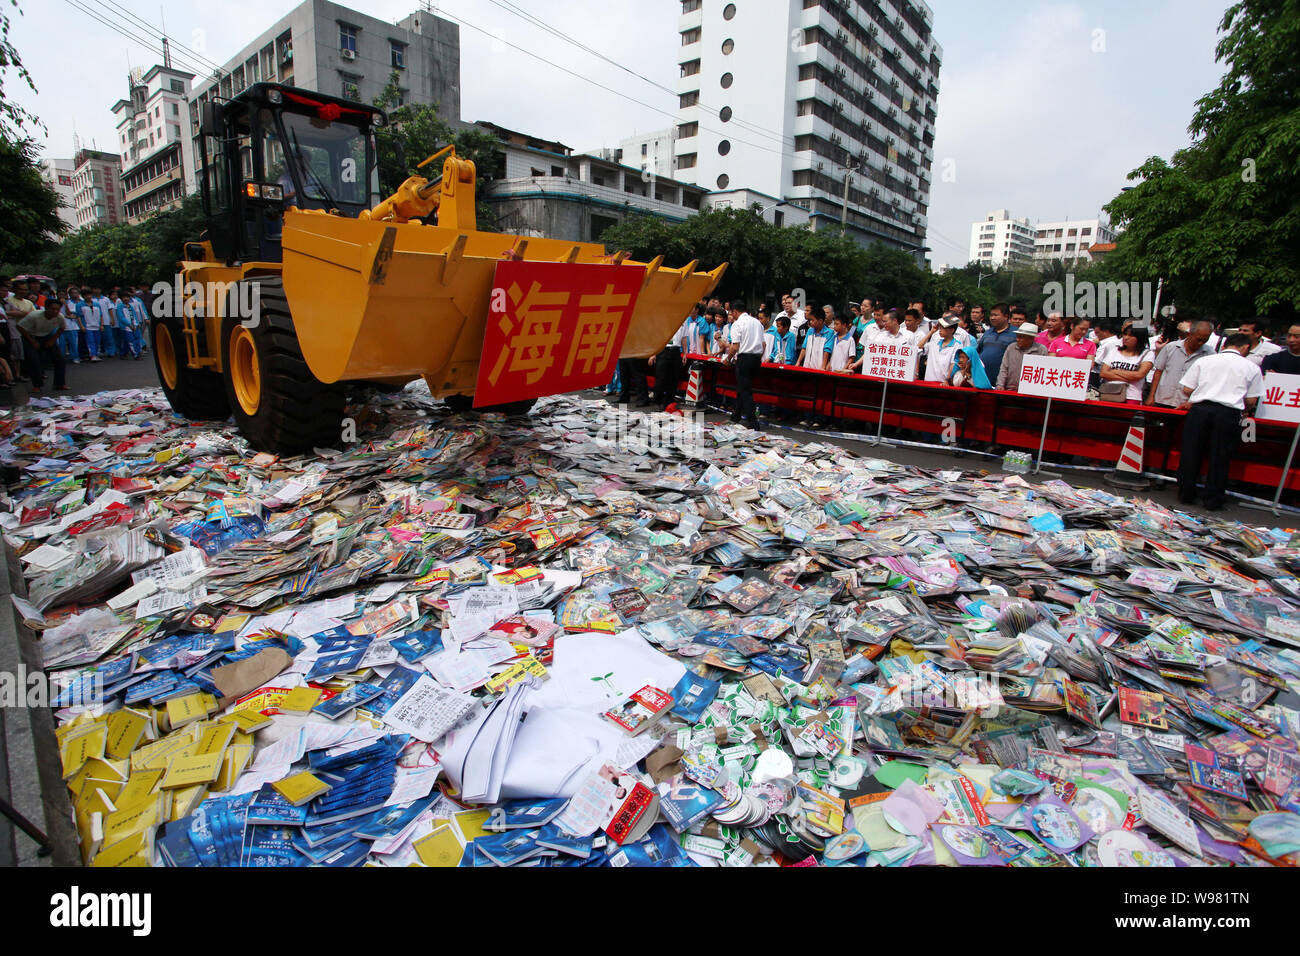 --FILE--A bulldozer destroys pirated DVDS and books in Haikou city, south Chinas Hainan province, 22 April 2011.  Chinese piracy and counterfeiting of Stock Photo